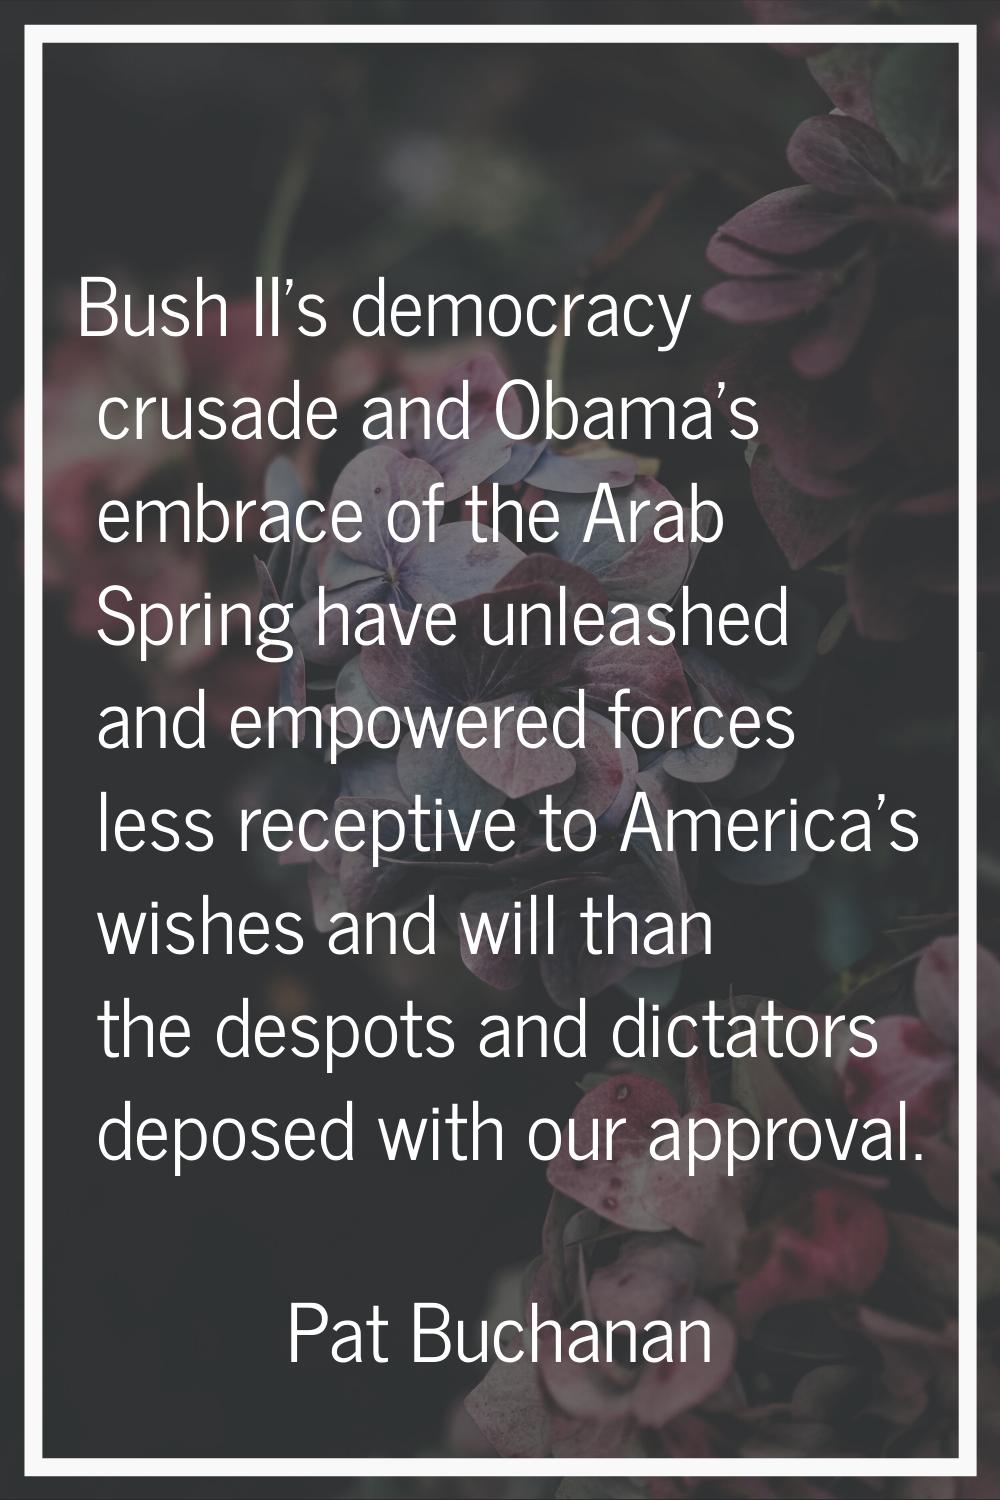 Bush II's democracy crusade and Obama's embrace of the Arab Spring have unleashed and empowered for